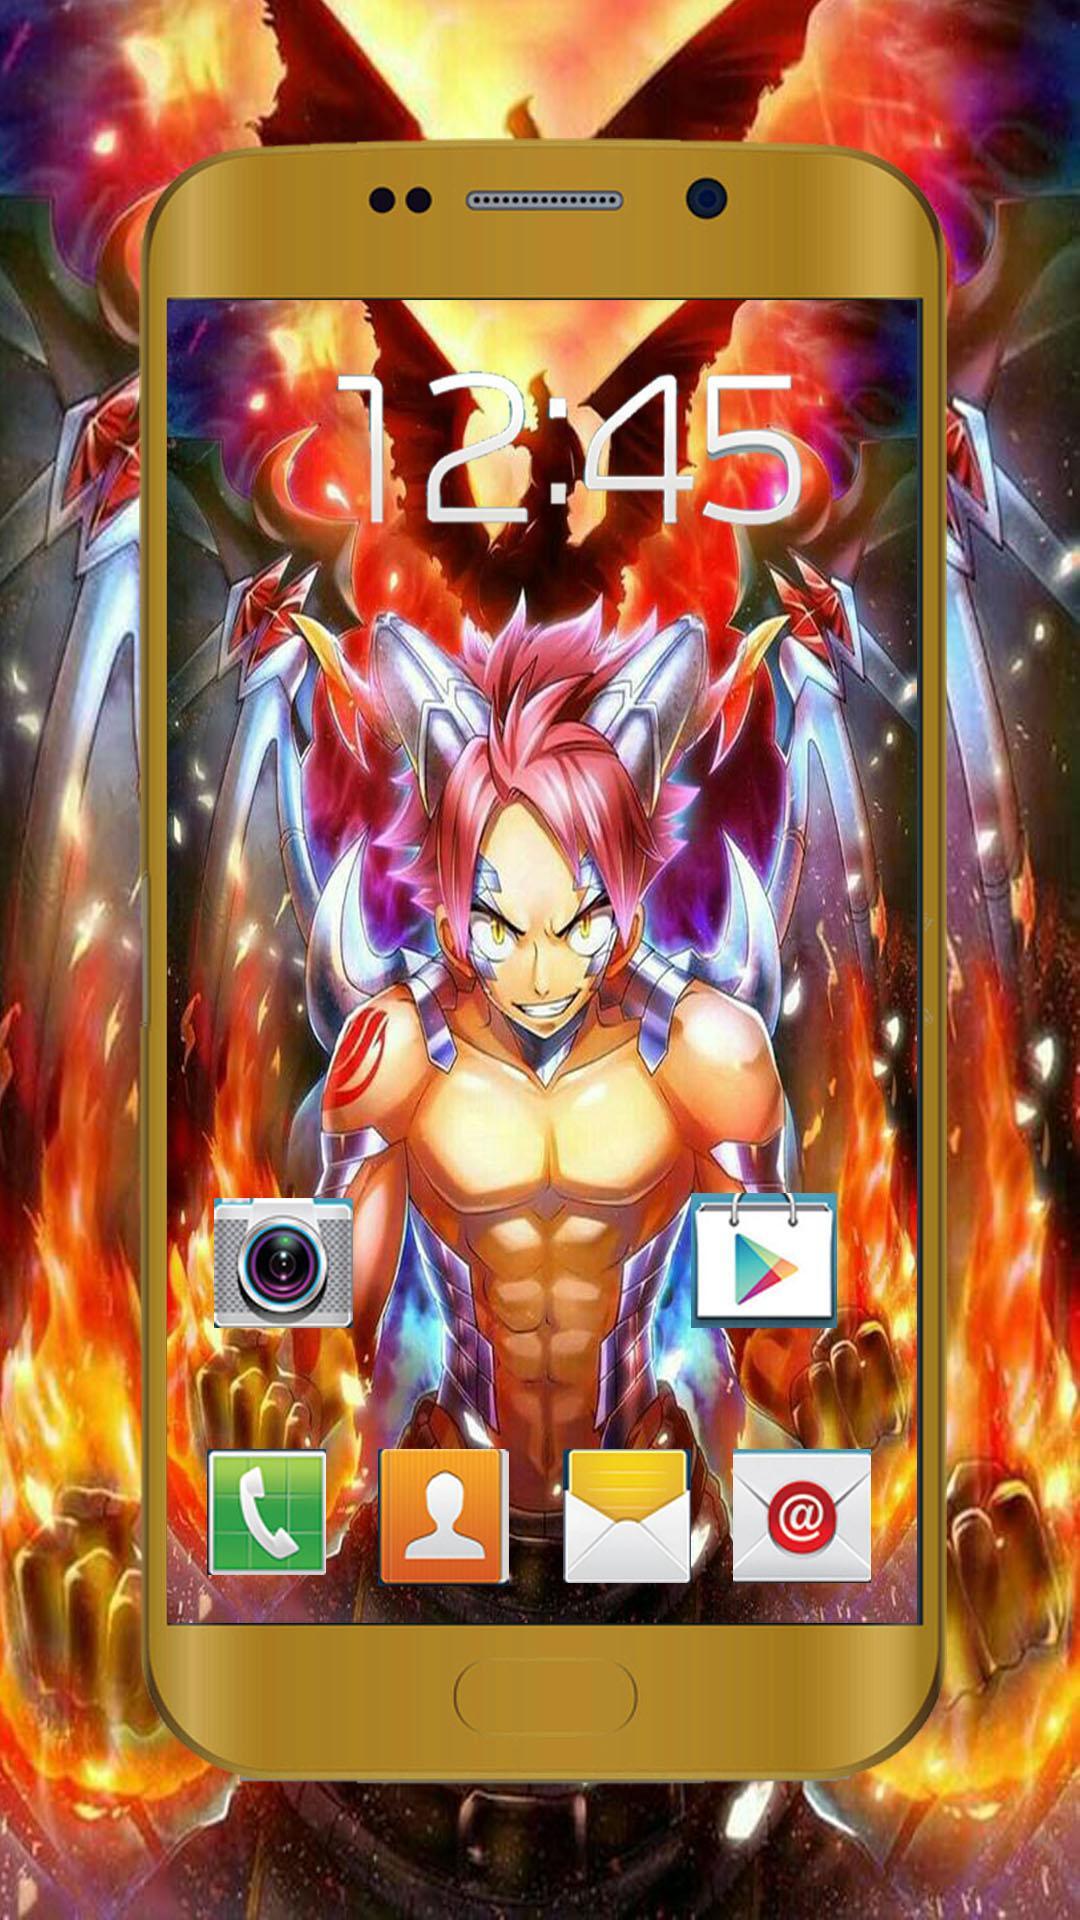 Fairy Tail Wallpapers Hd For Android Apk Download